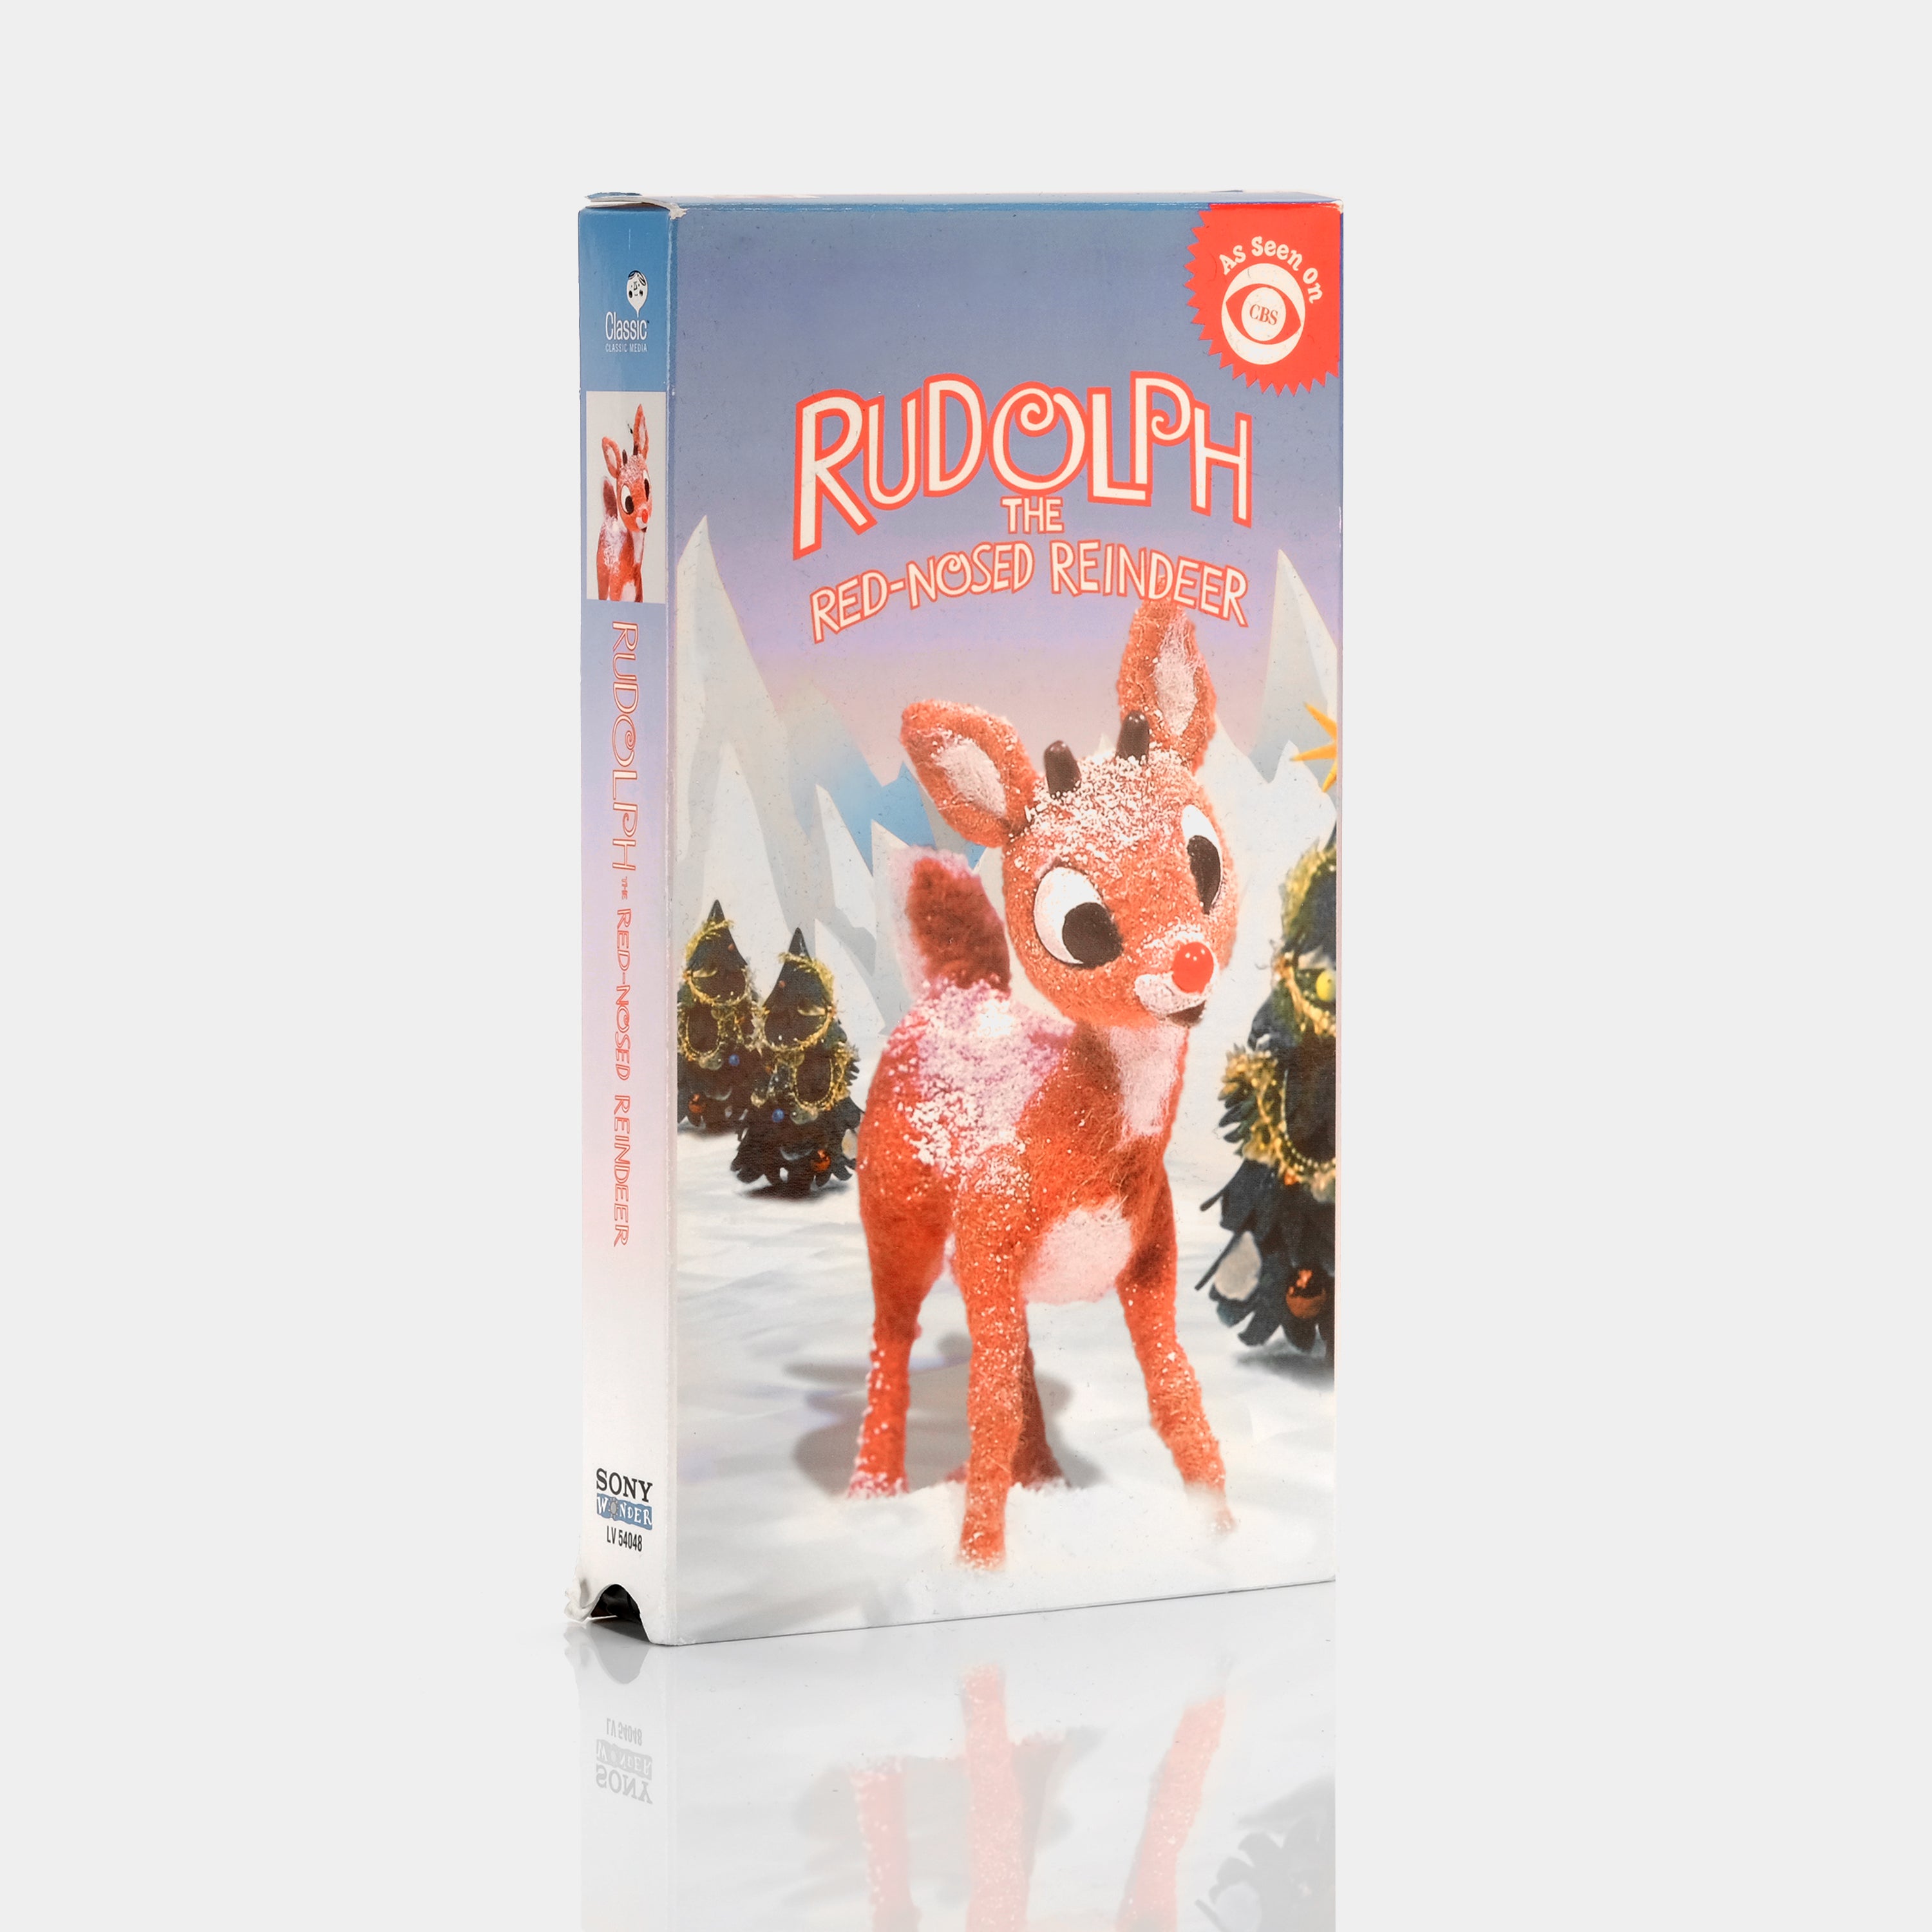 Rudolph the Red-Nosed Reindeer VHS Tape